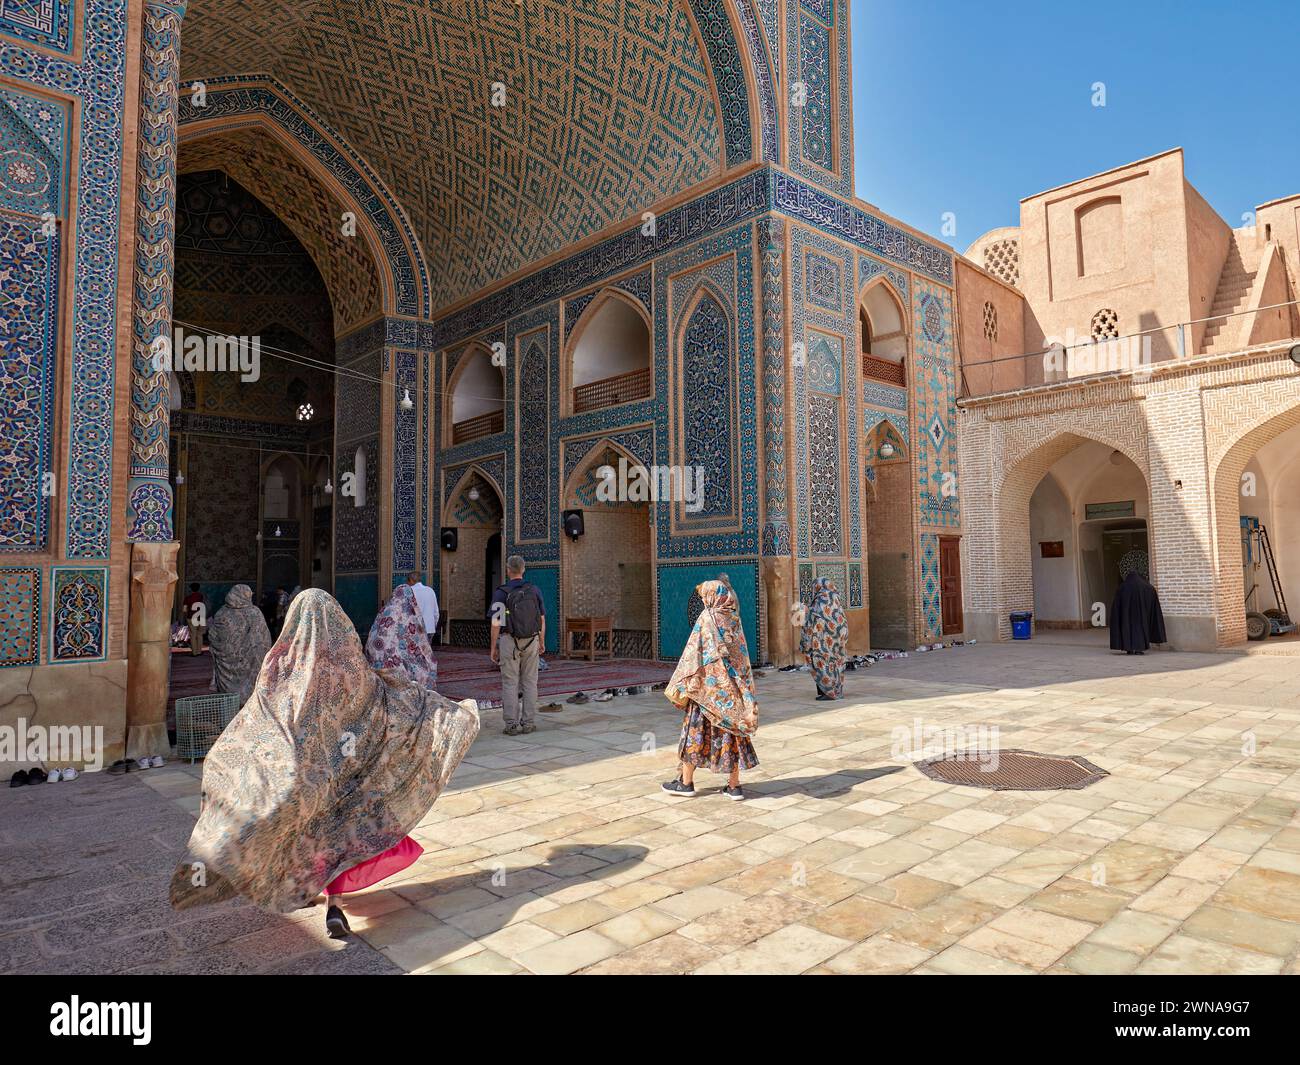 Woman with her chador flowing in the wind walks to the entrance of the Jameh Mosque of Yazd, 14th-century Shia mosque in the Old Town of Yazd, Iran. Stock Photo